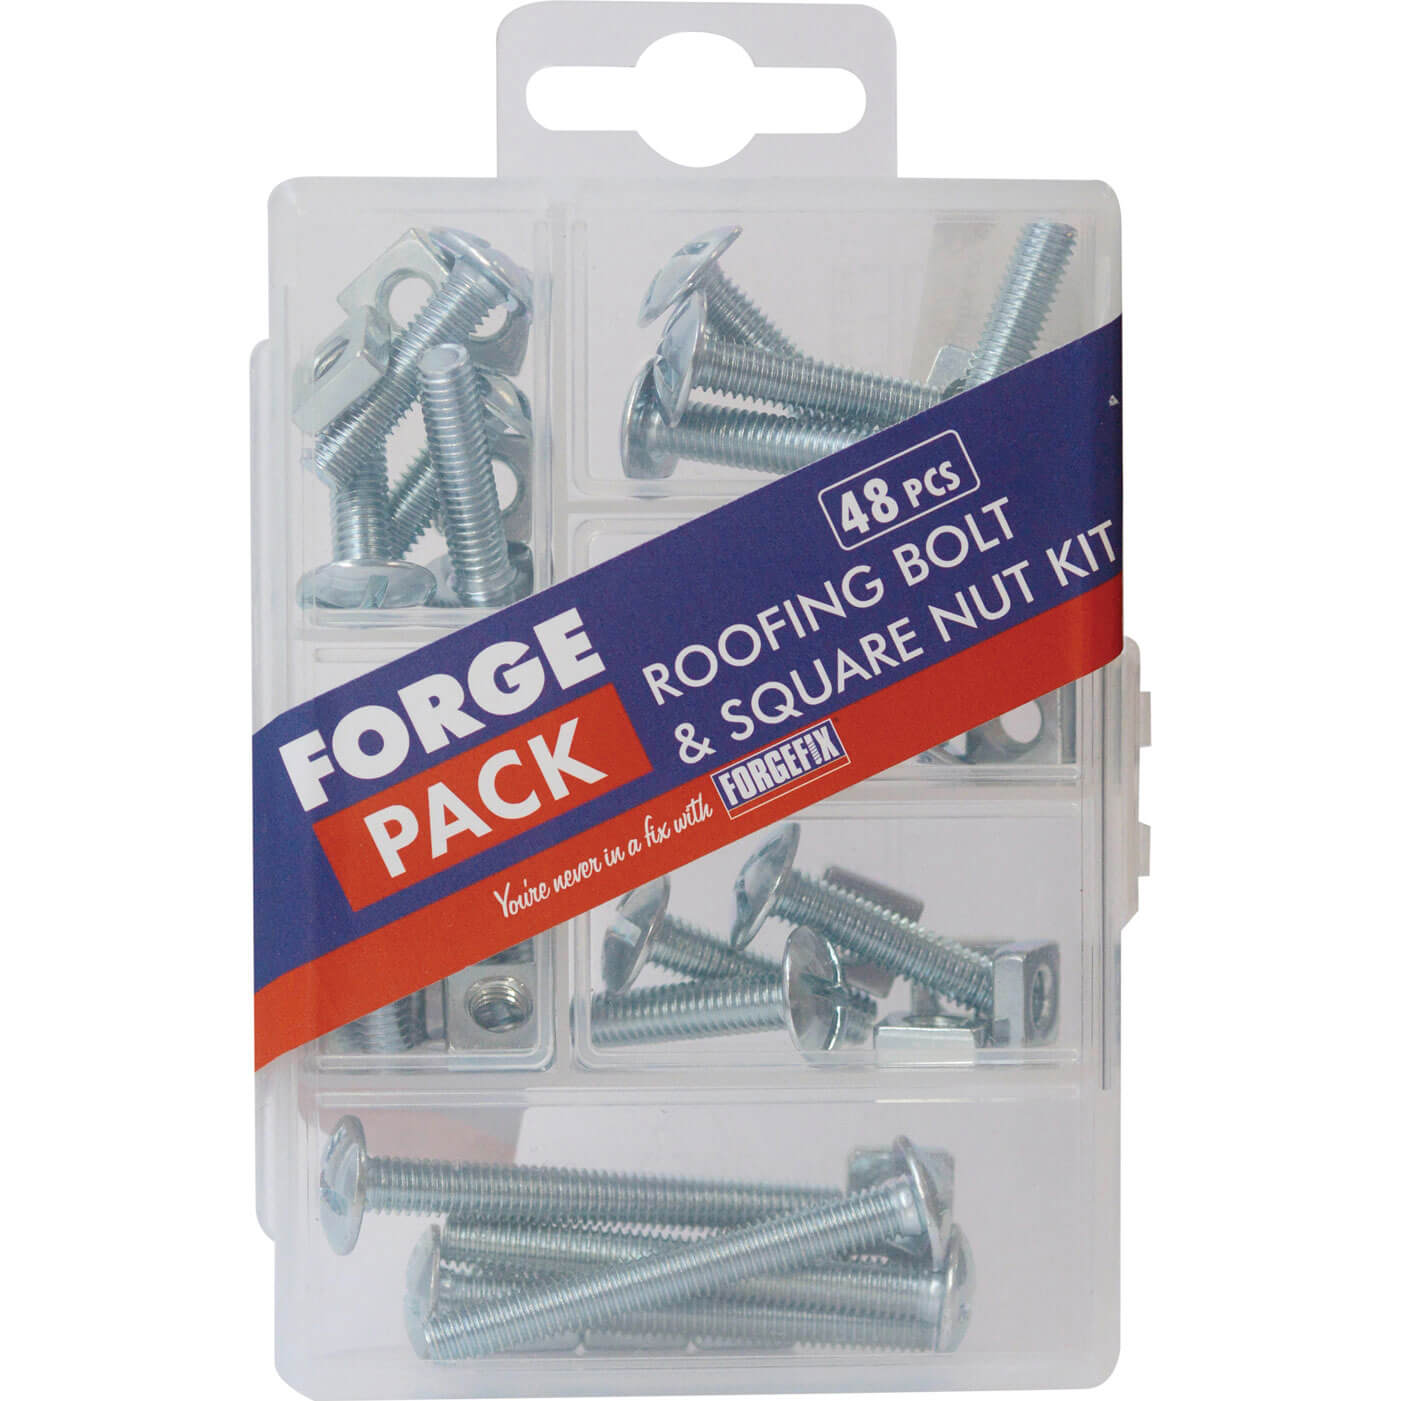 Photo of Forgefix Forgepack 48 Piece Roofing Bolt And Nut Set